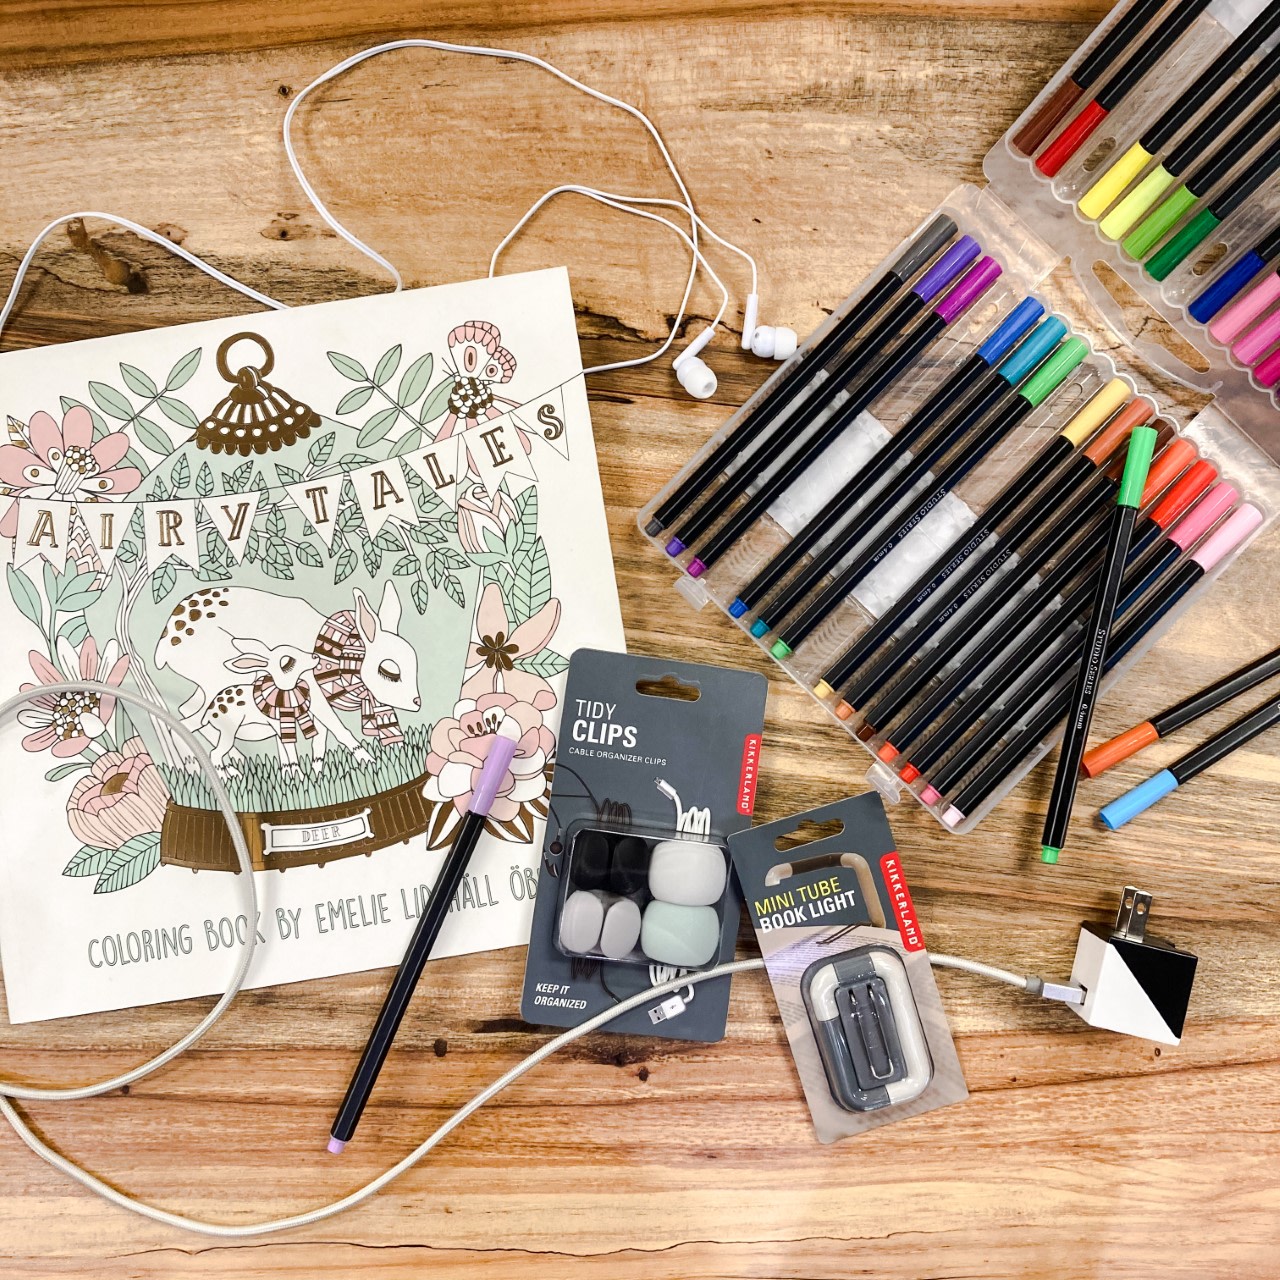 Download Austin Public Library On Twitter Wherever This Summer Takes You Stop By Apl Shop For Some Great Vacation Approved Take Alongs From Phone Charging Cables To Coloring Books Aplshop Has You Covered Shoplocal Summer